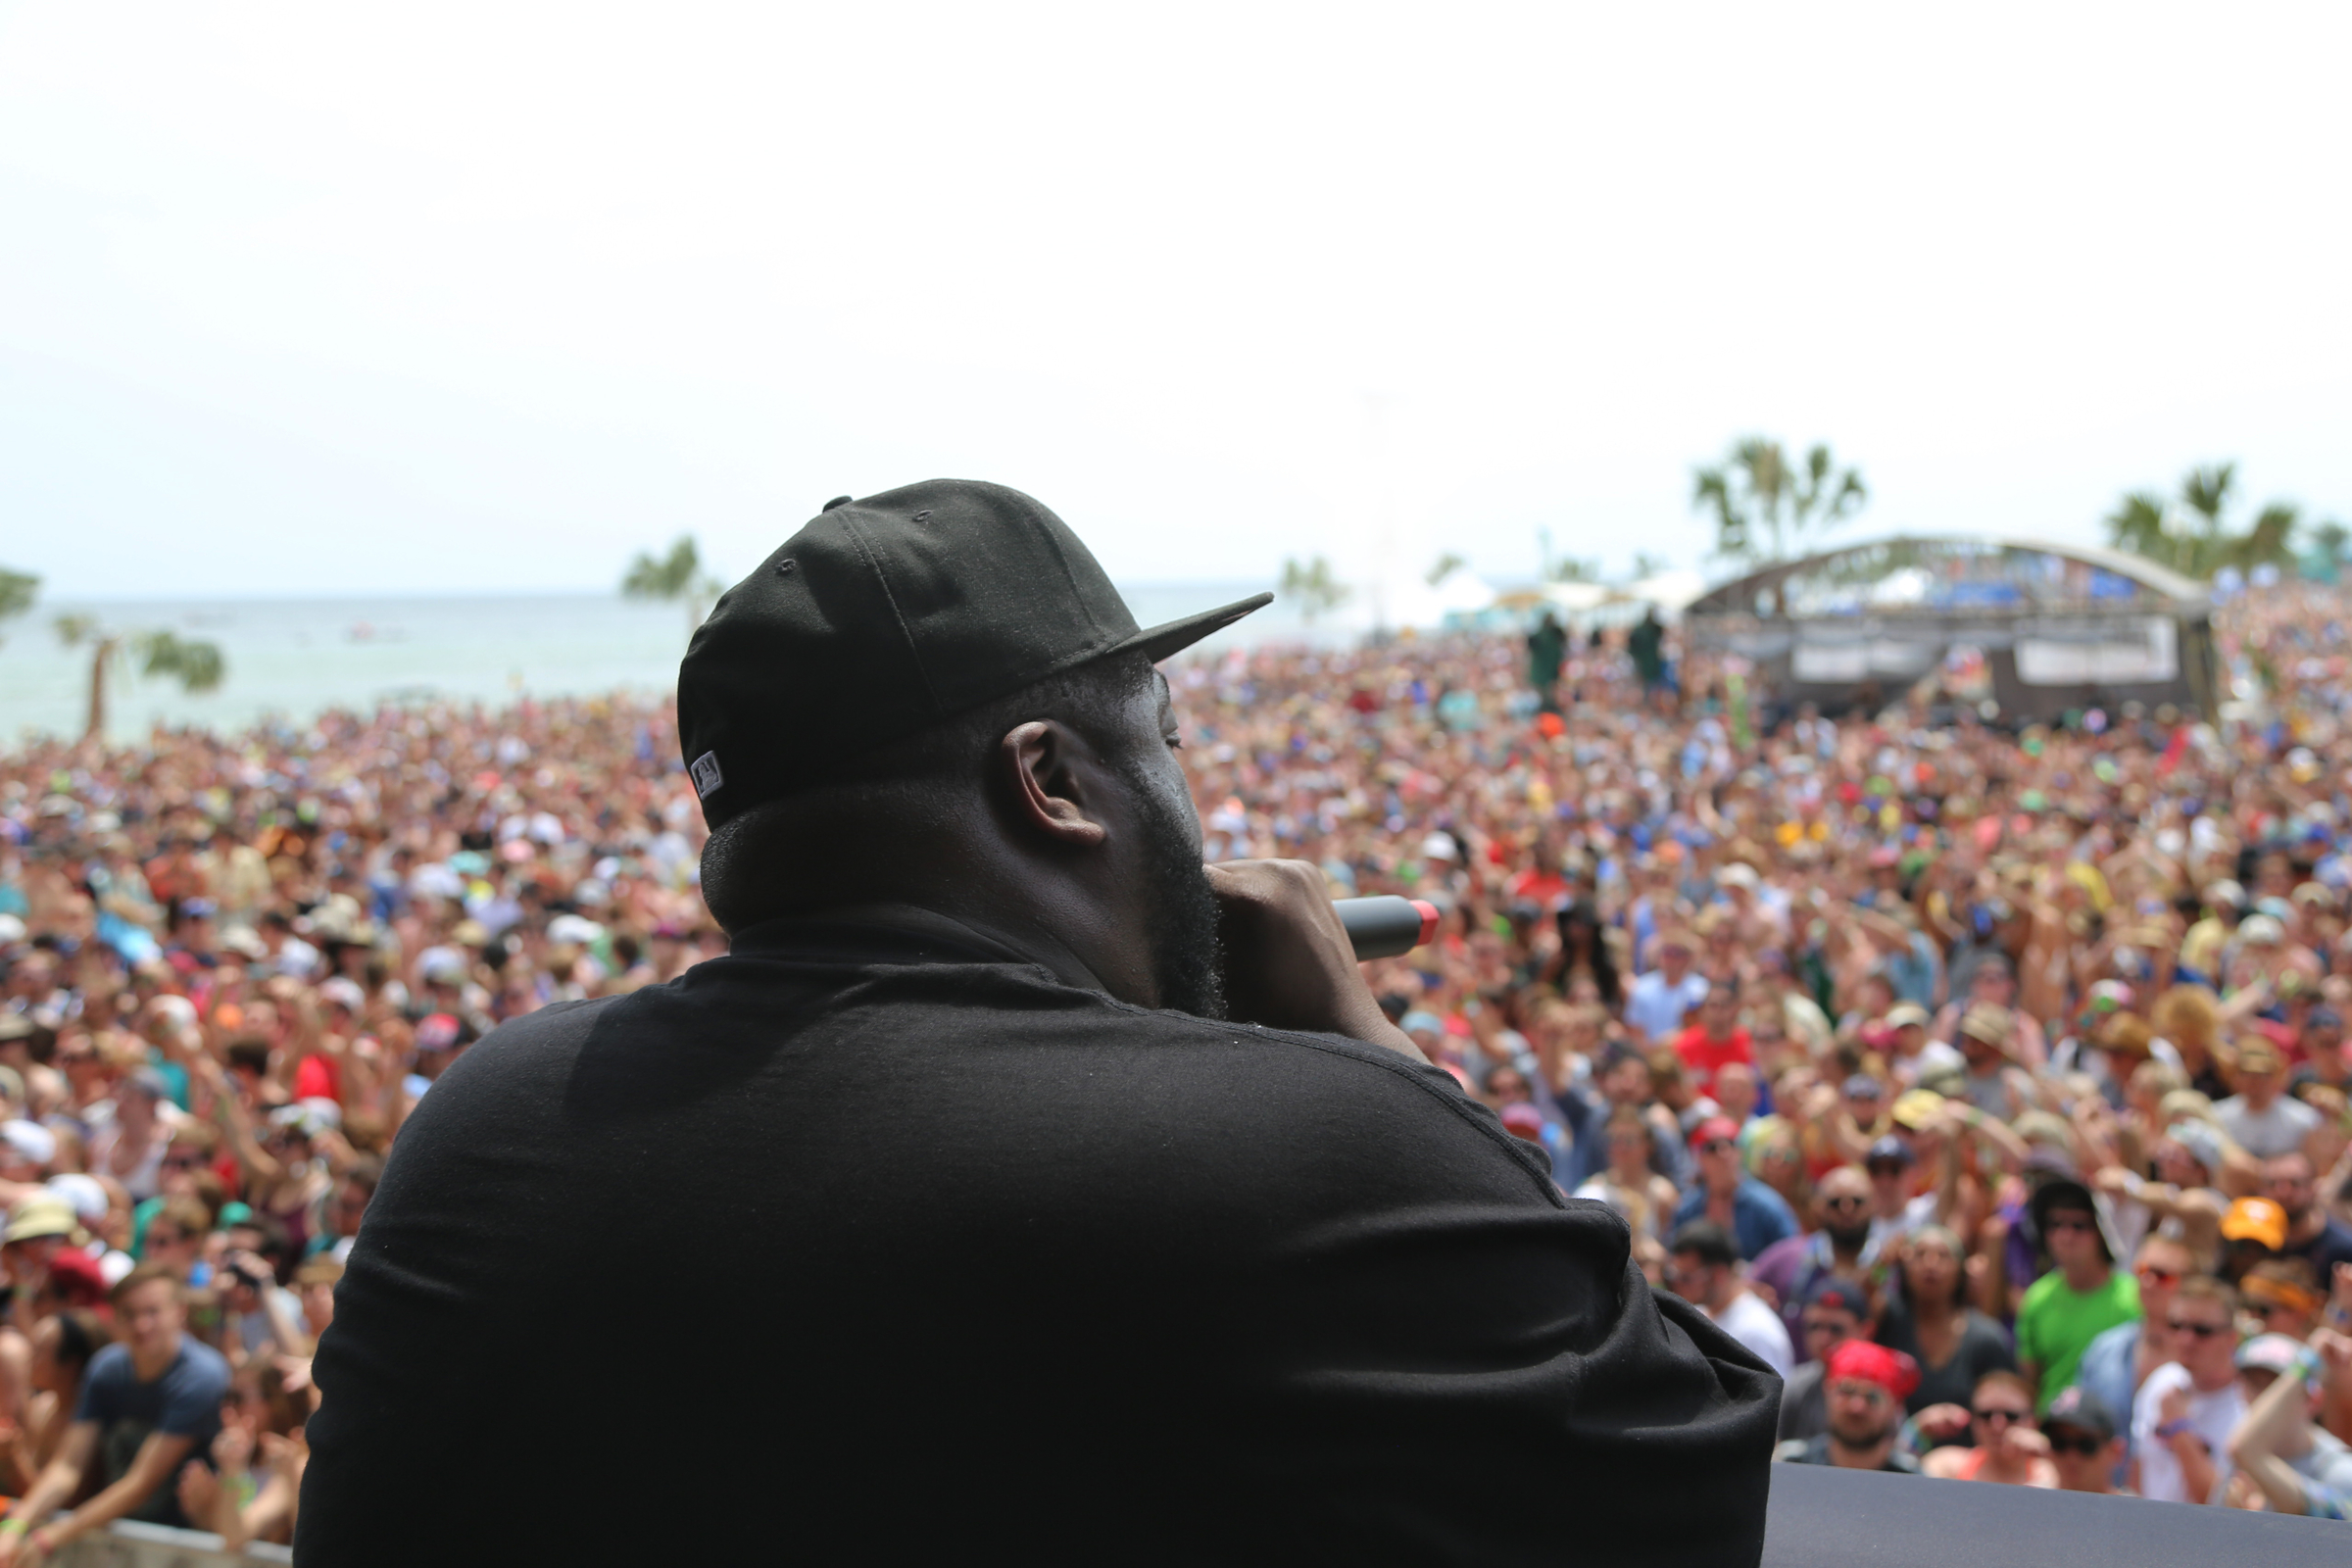 Run the Jewels at Hangout Music Festival 2016. Photo: Courtesy of Hangout Music Festival